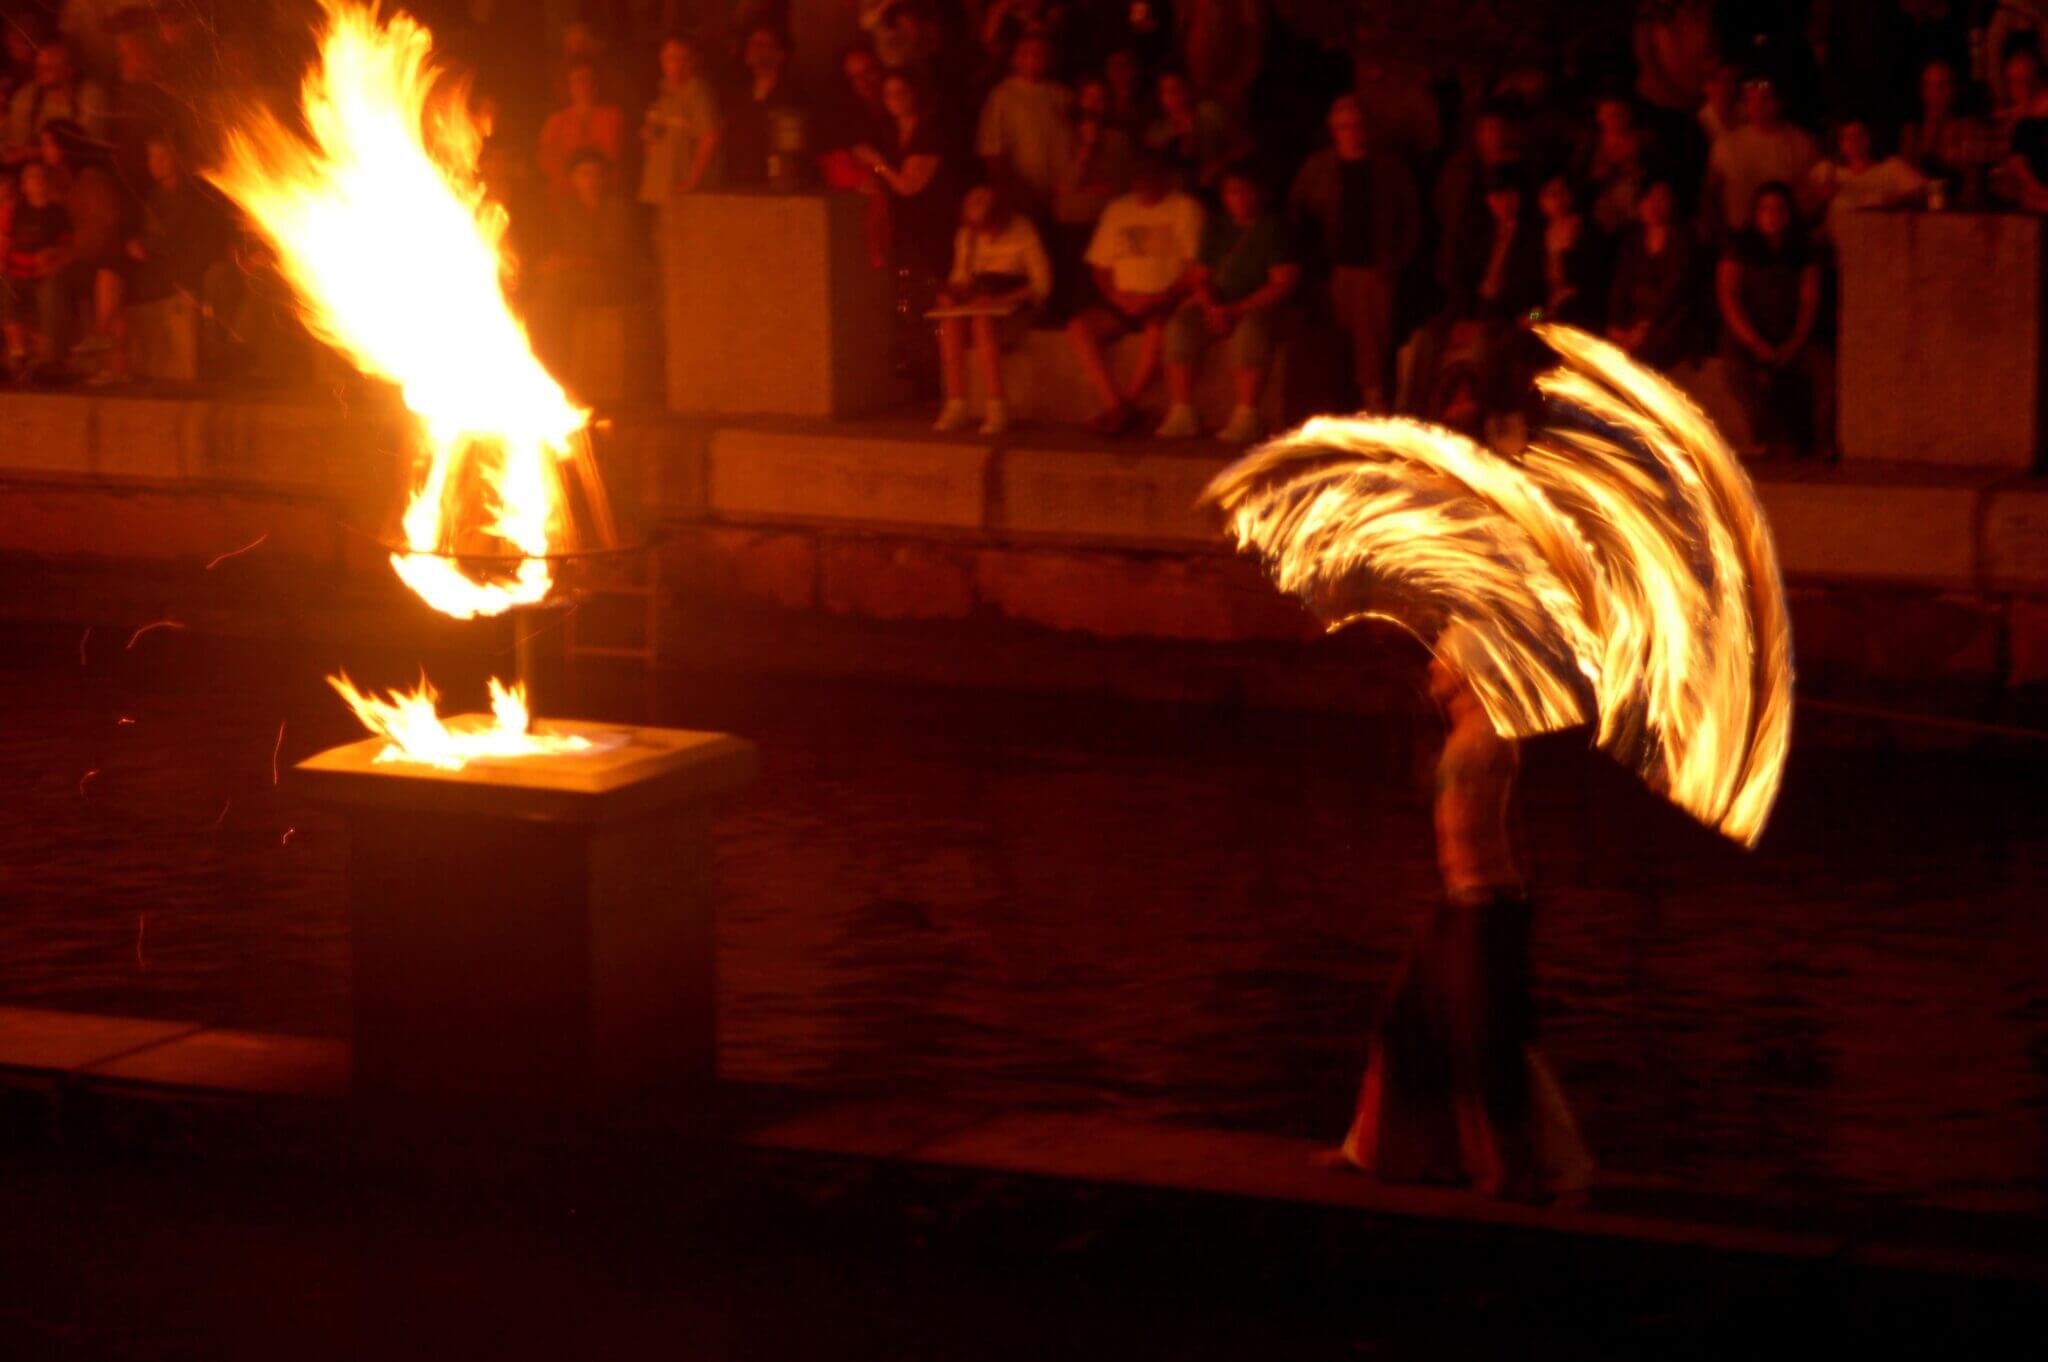 The flames of the WaterFire Providence event in Rhode Island